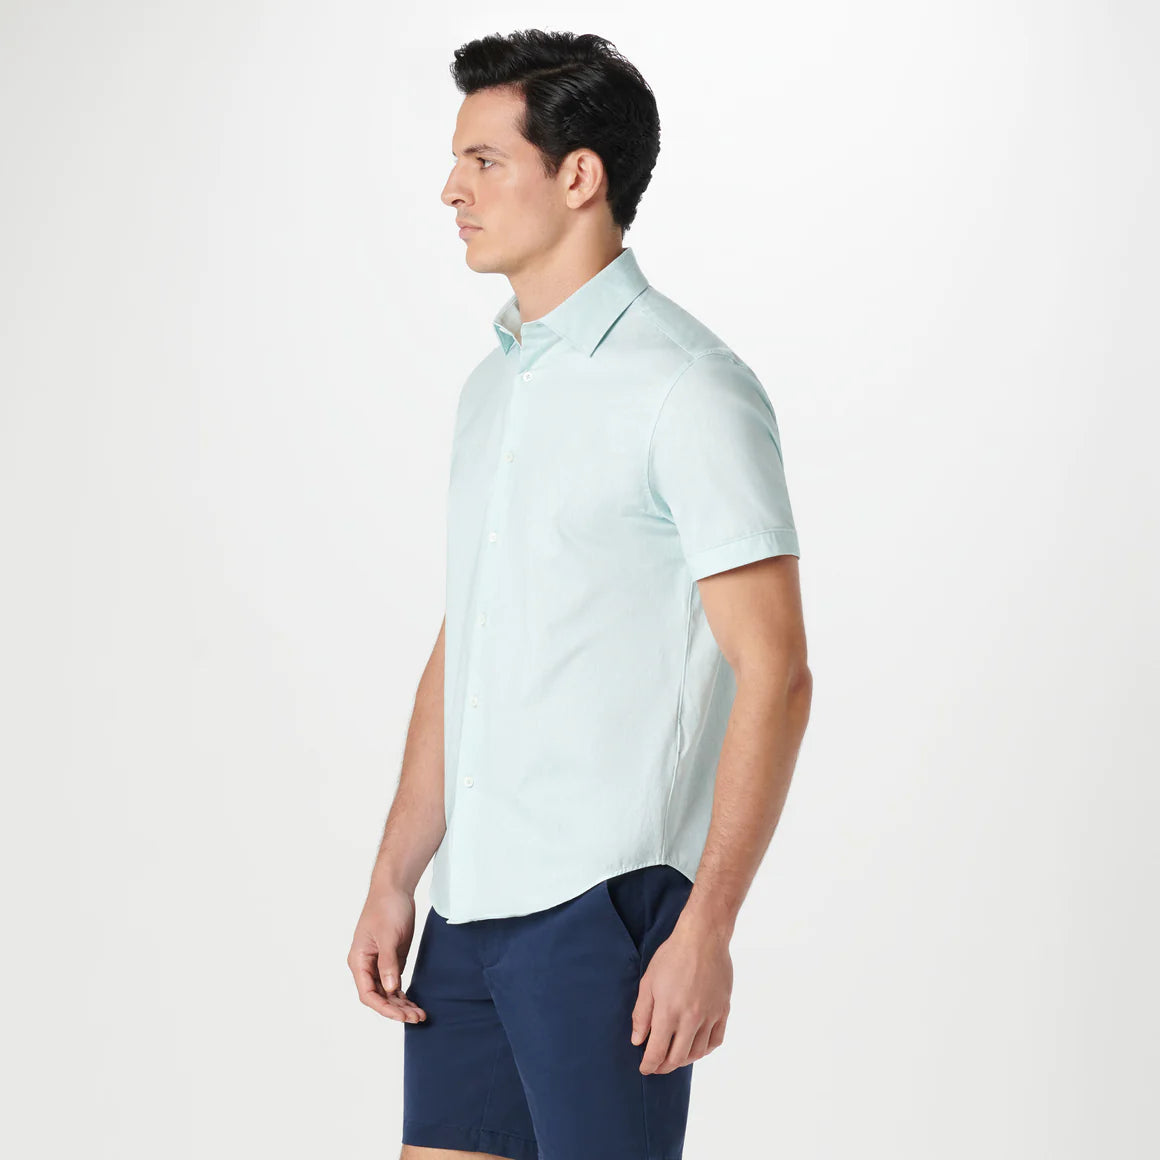 The Miles short-sleeved shirt features a chambray effect print on OoohCotton fabric, a point collar, genuine shell buttons, and a curved hem. OoohCotton is a double-mercerized, wrinkle-resistant, breathable, and easy-care cotton blend with 8-way stretch, quick-dry, and thermal comfort properties